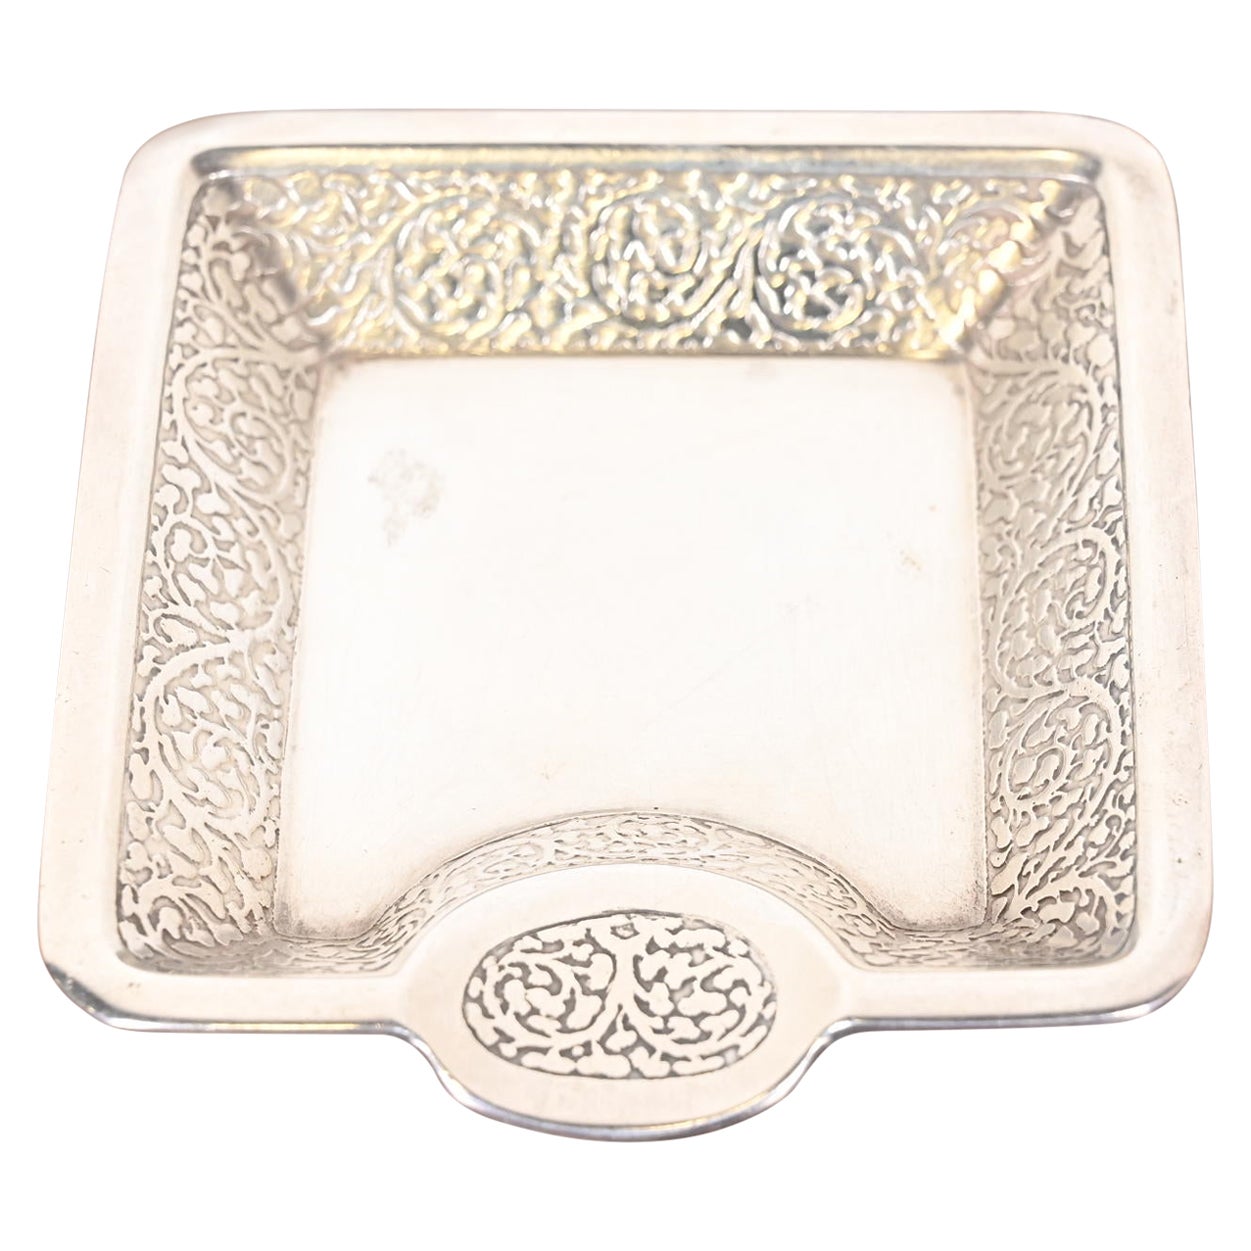 Tiffany & Co. Art Deco Sterling Silver Ashtray or Catchall Tray For Sale